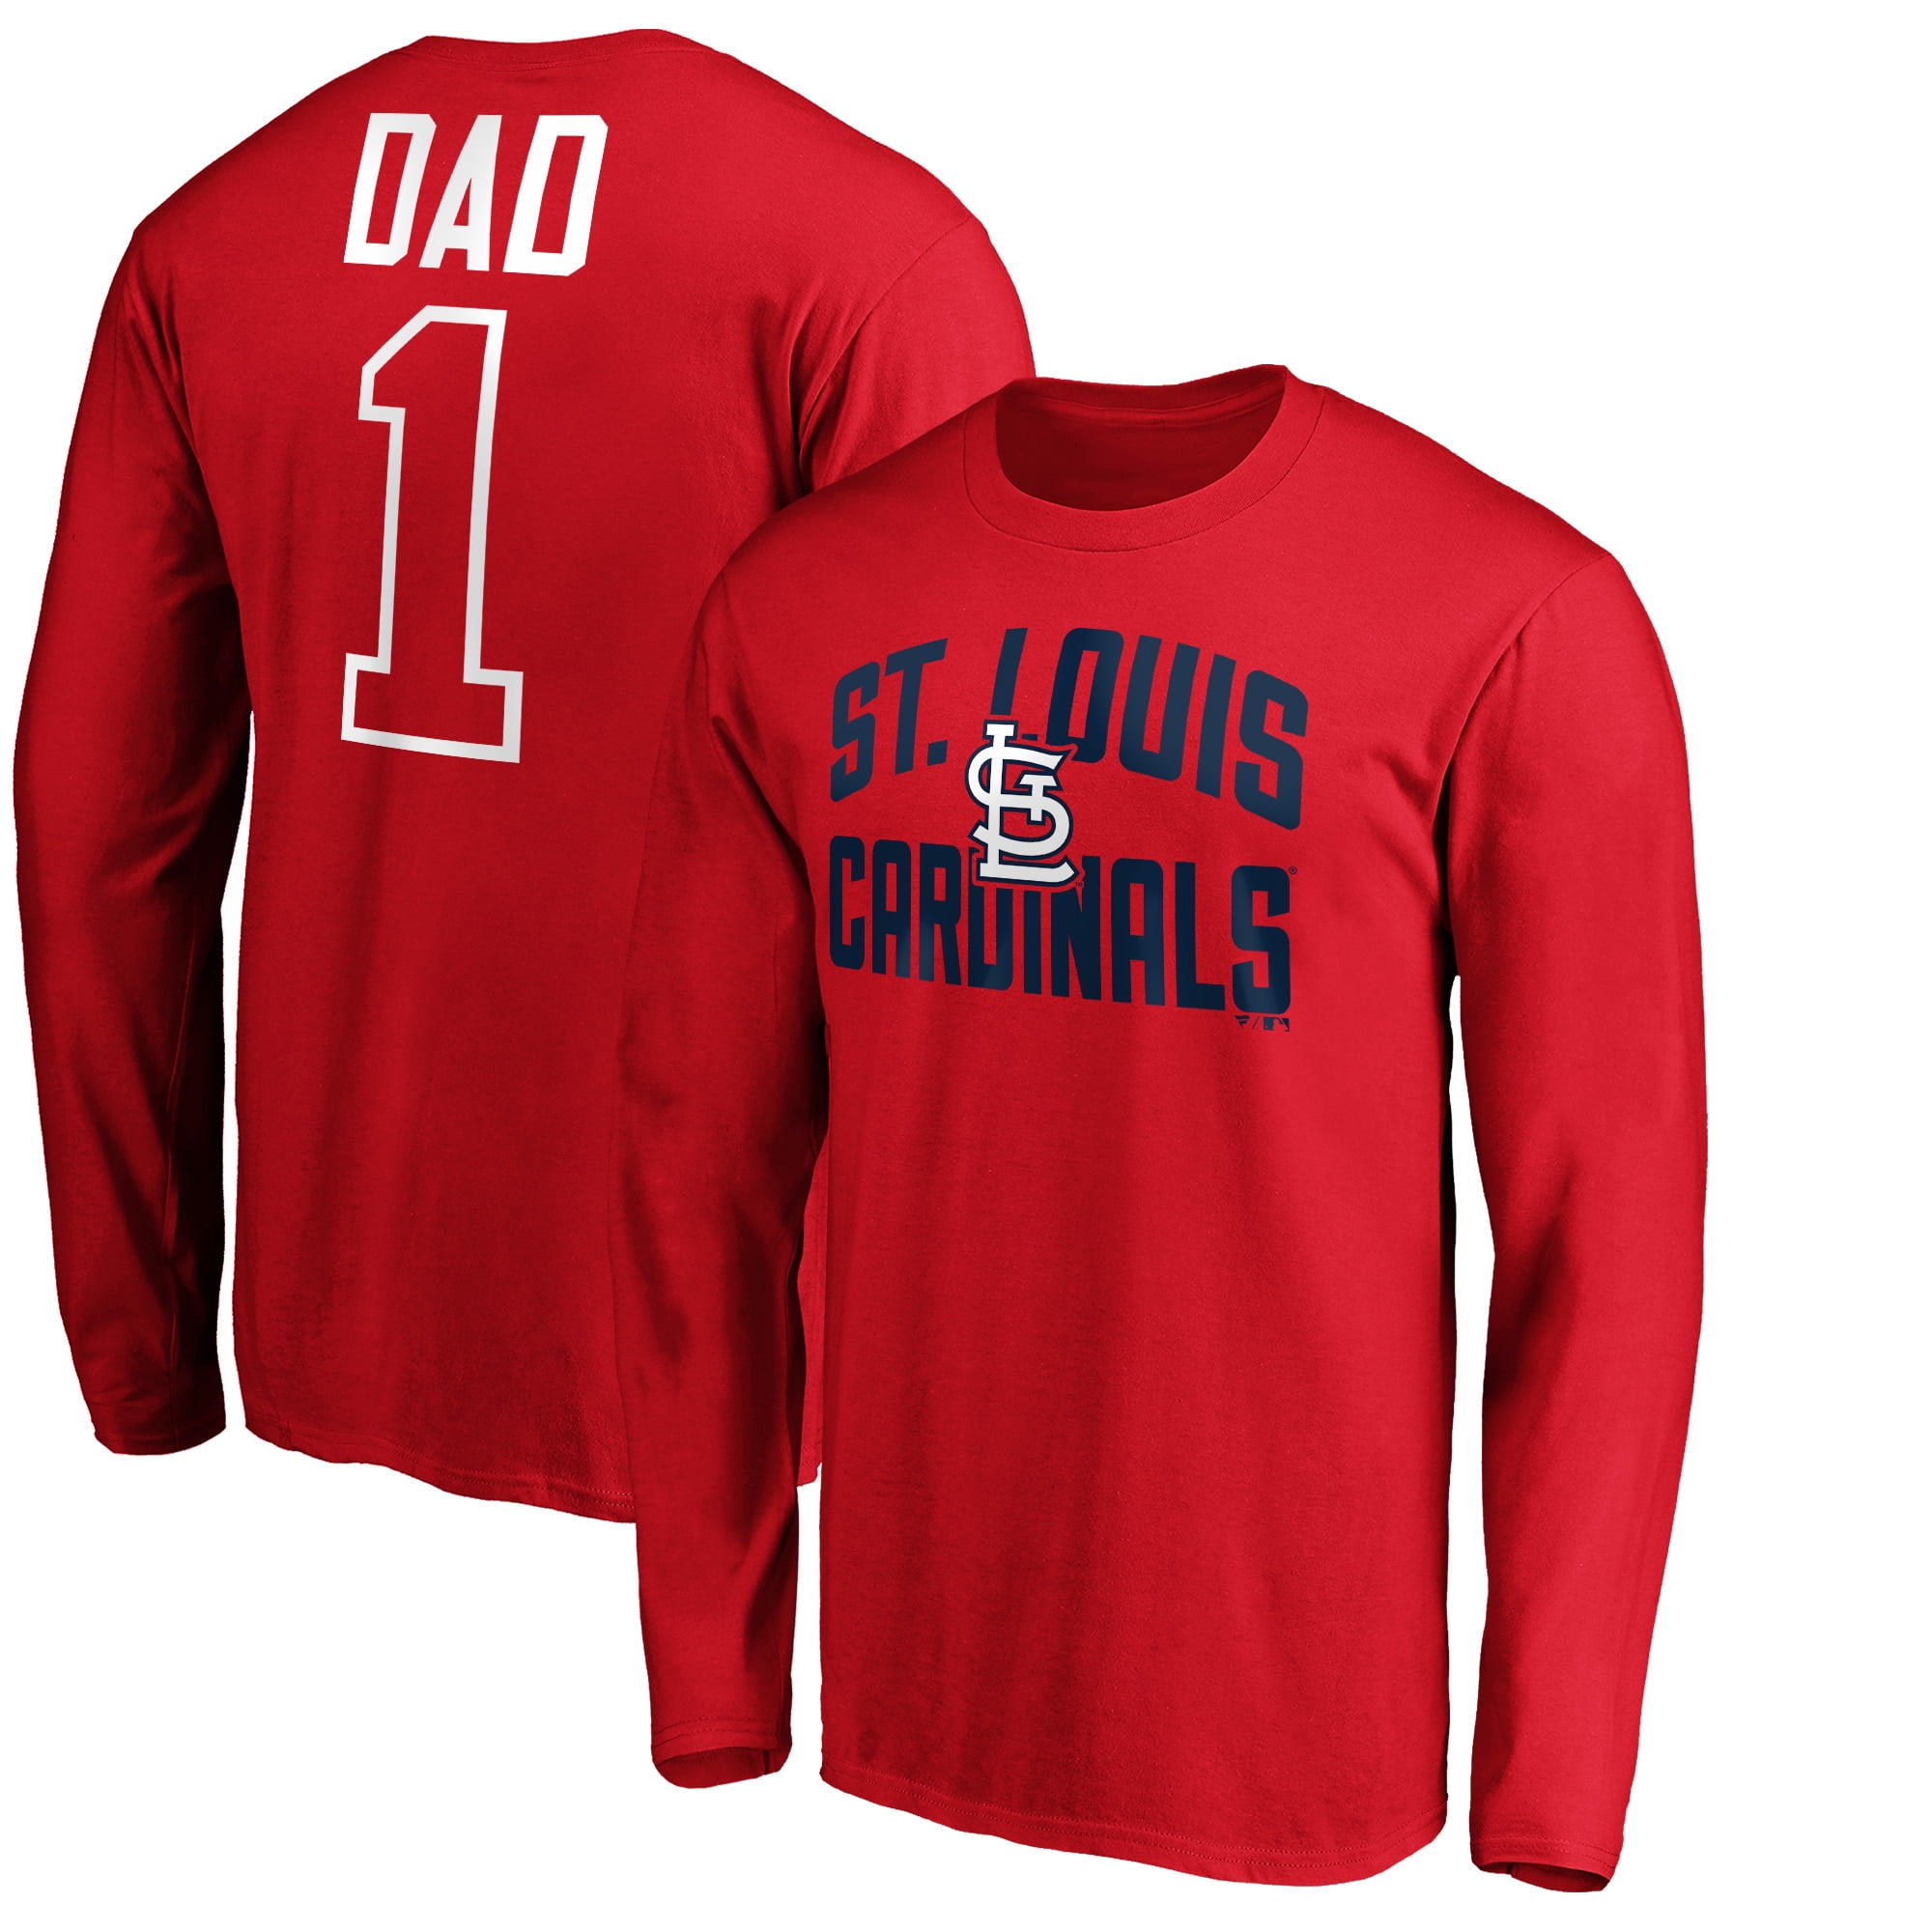 fathers day cardinals jersey